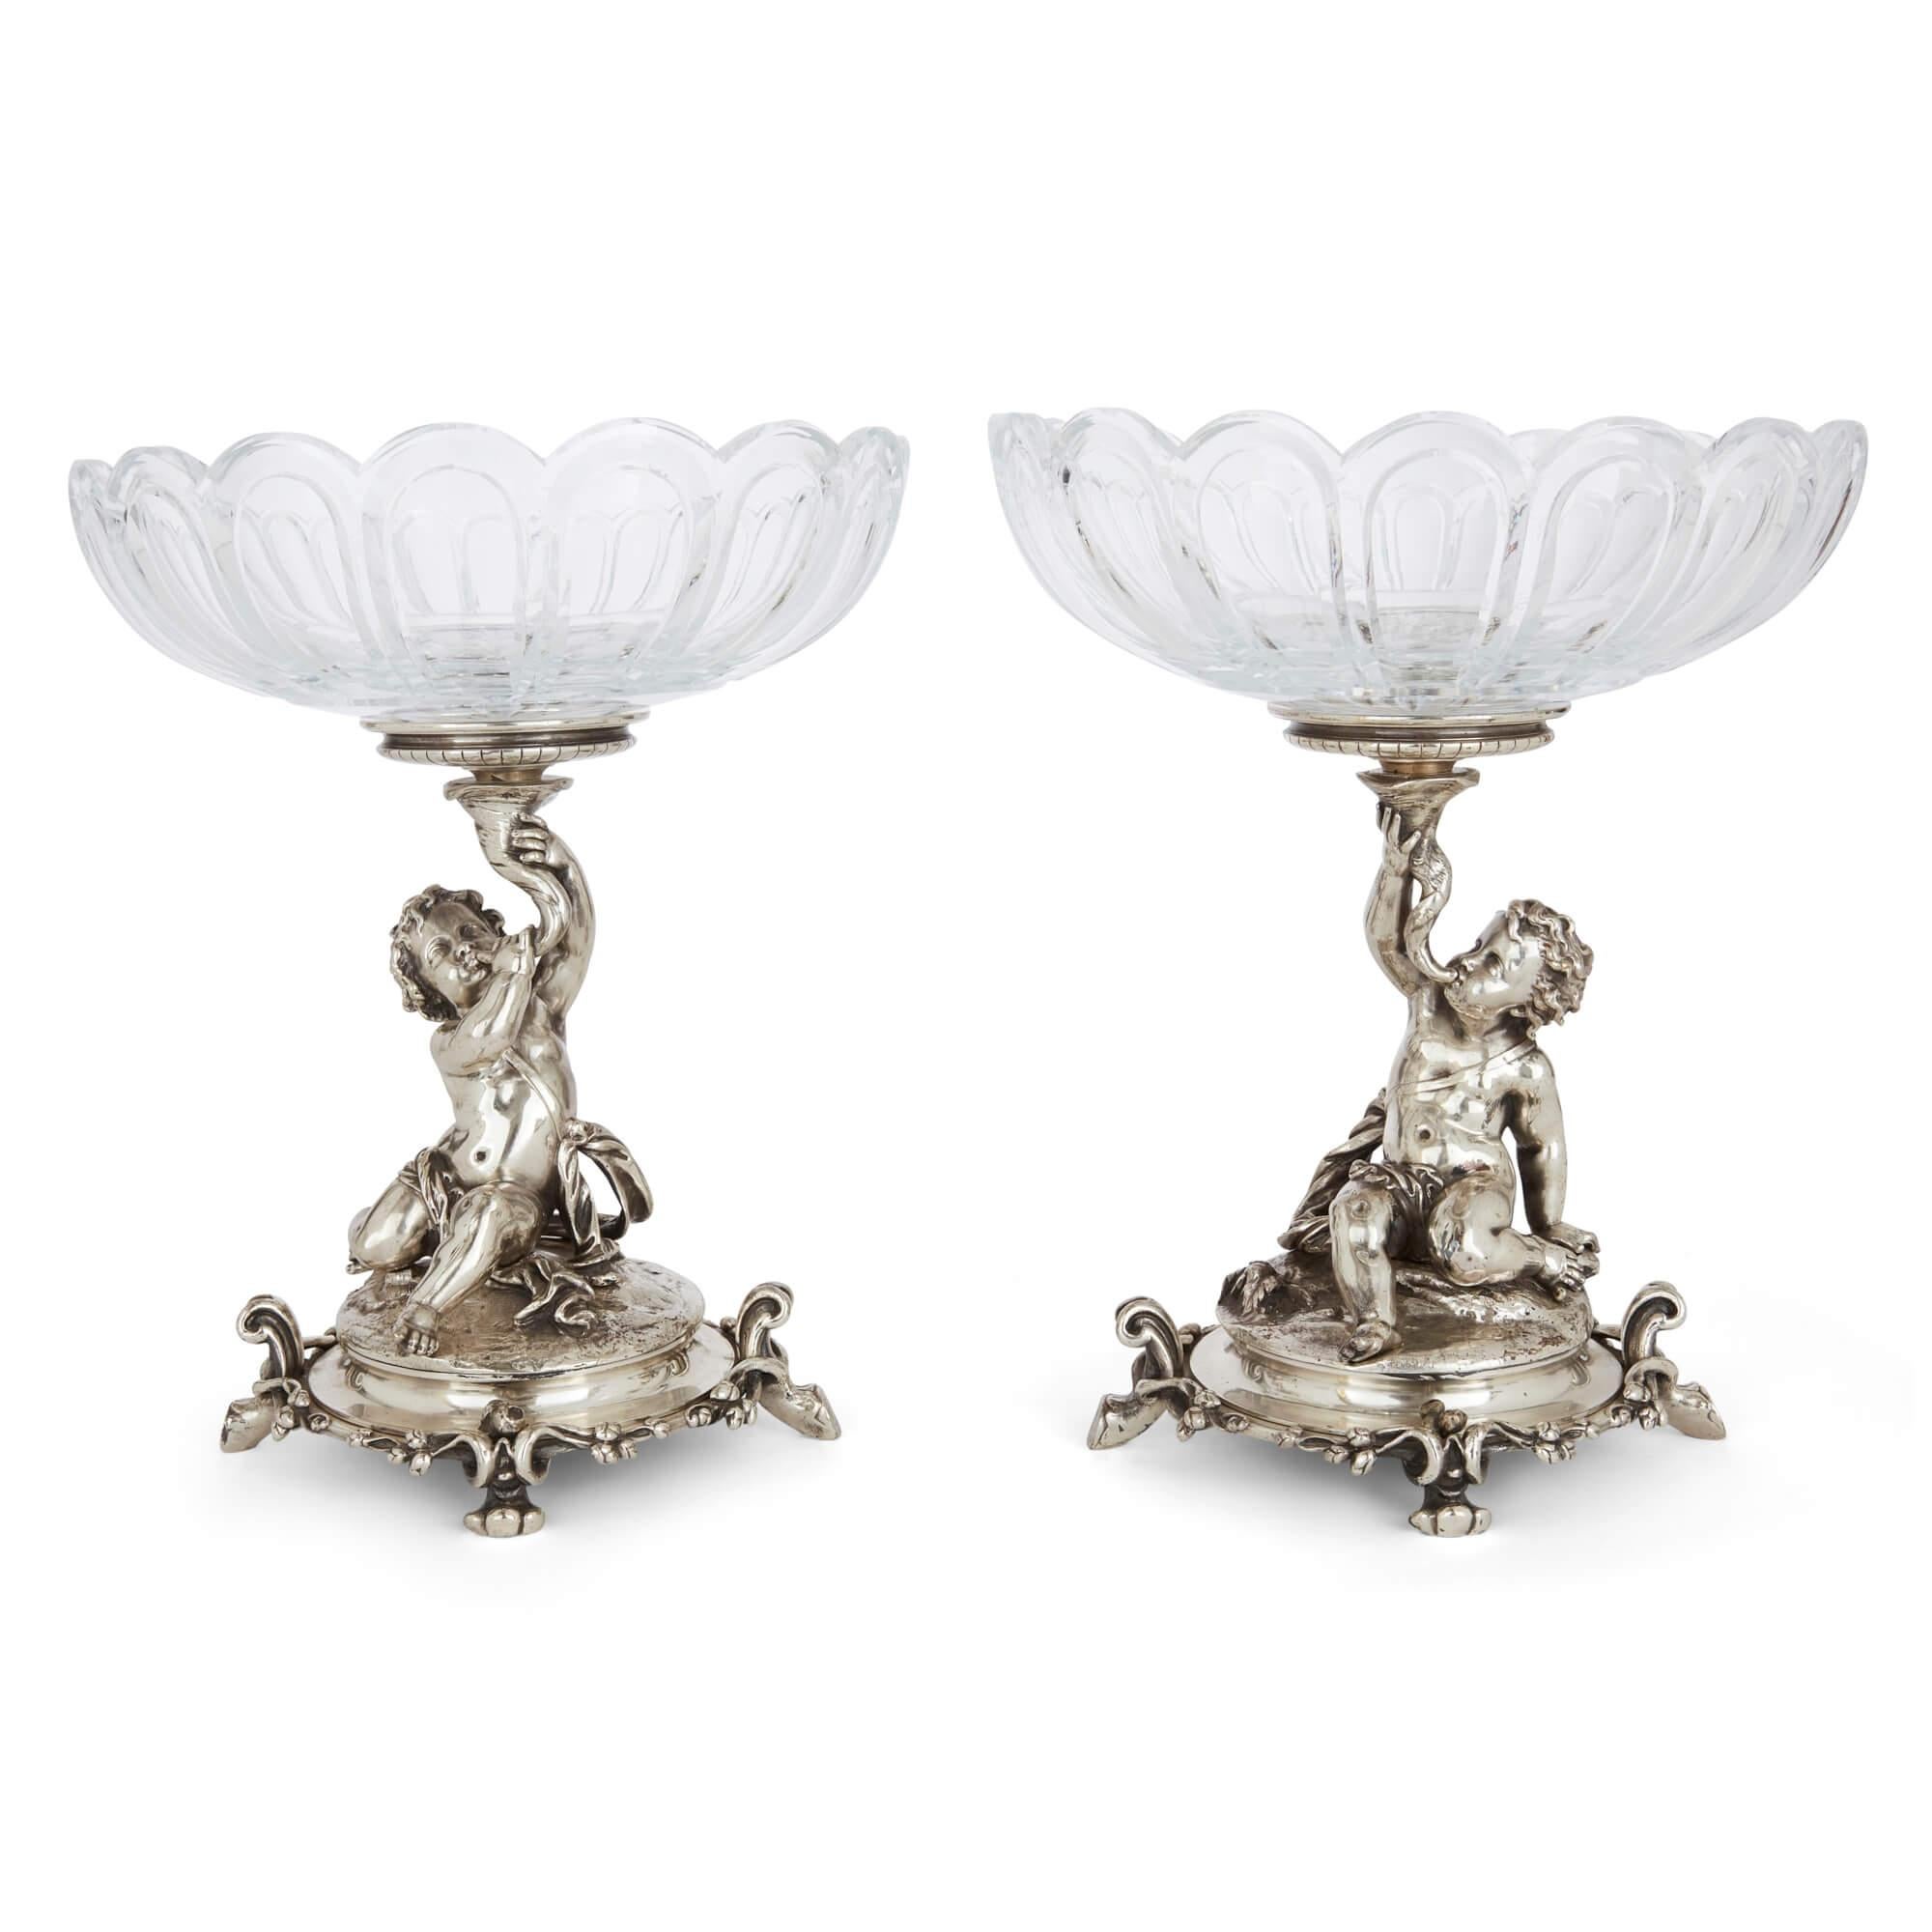 Pair of 19th century cut-glass and silvered bronze compotes by Christofle 
French, 19th Century 
Height 30cm, diameter 25cm

Crafted in the lavish Rococo Revival style, this exquisite pair of compotes pair cut-glass tazza-like bowls with sculptural